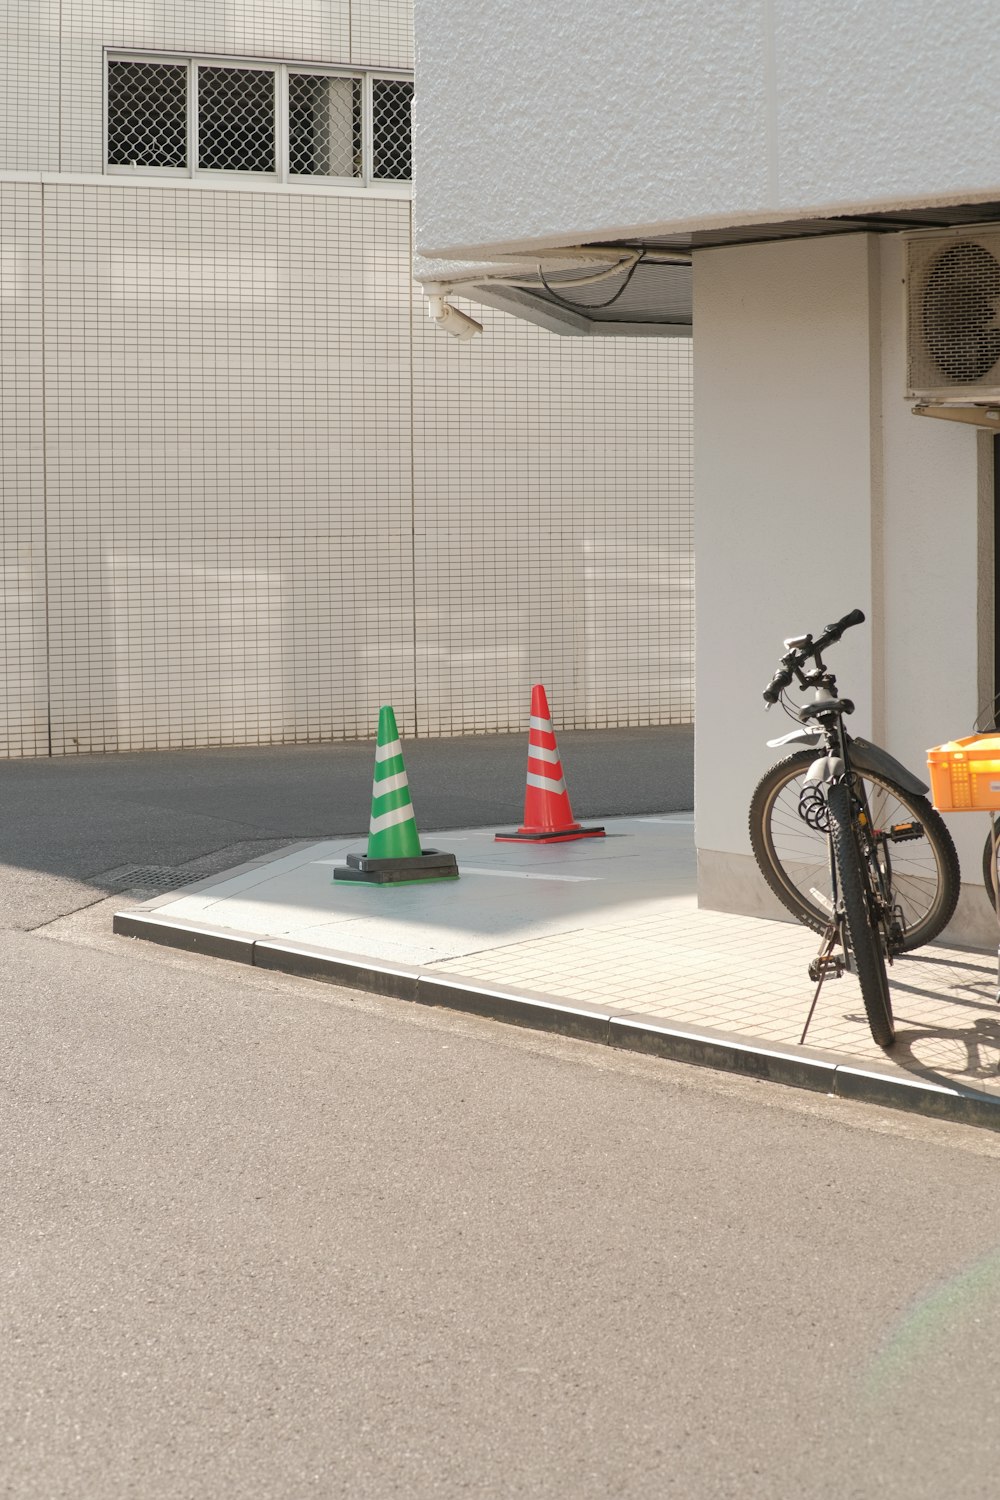 a bicycle is parked next to a traffic cone